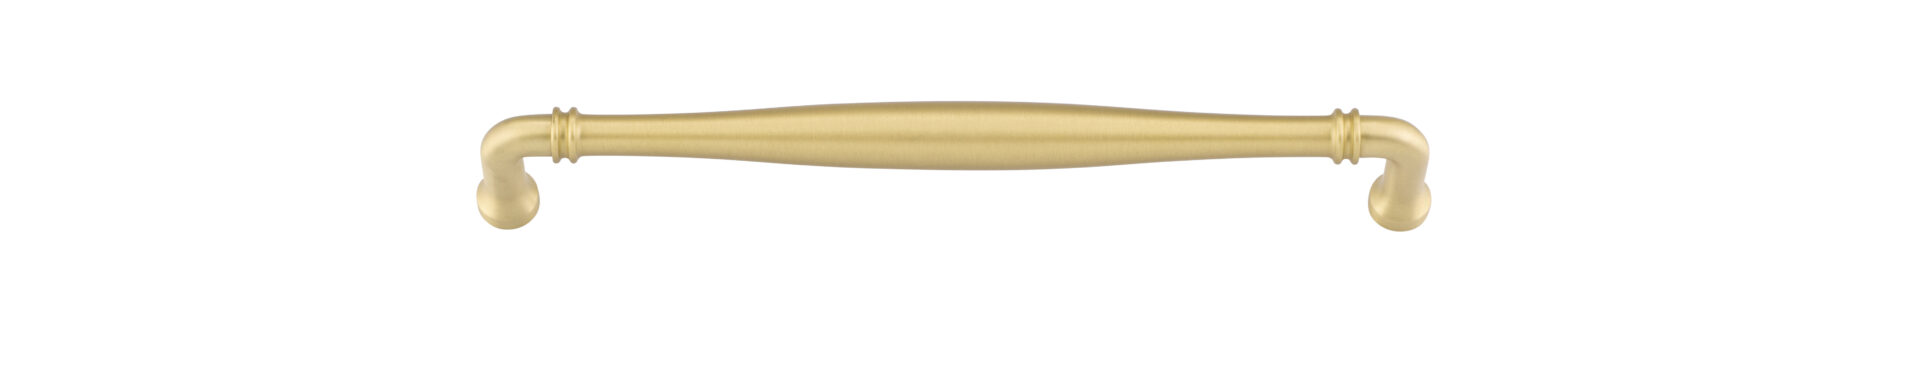 17106 - Sarlat Cabinet Pull - CTC256mm - Brushed Gold PVD